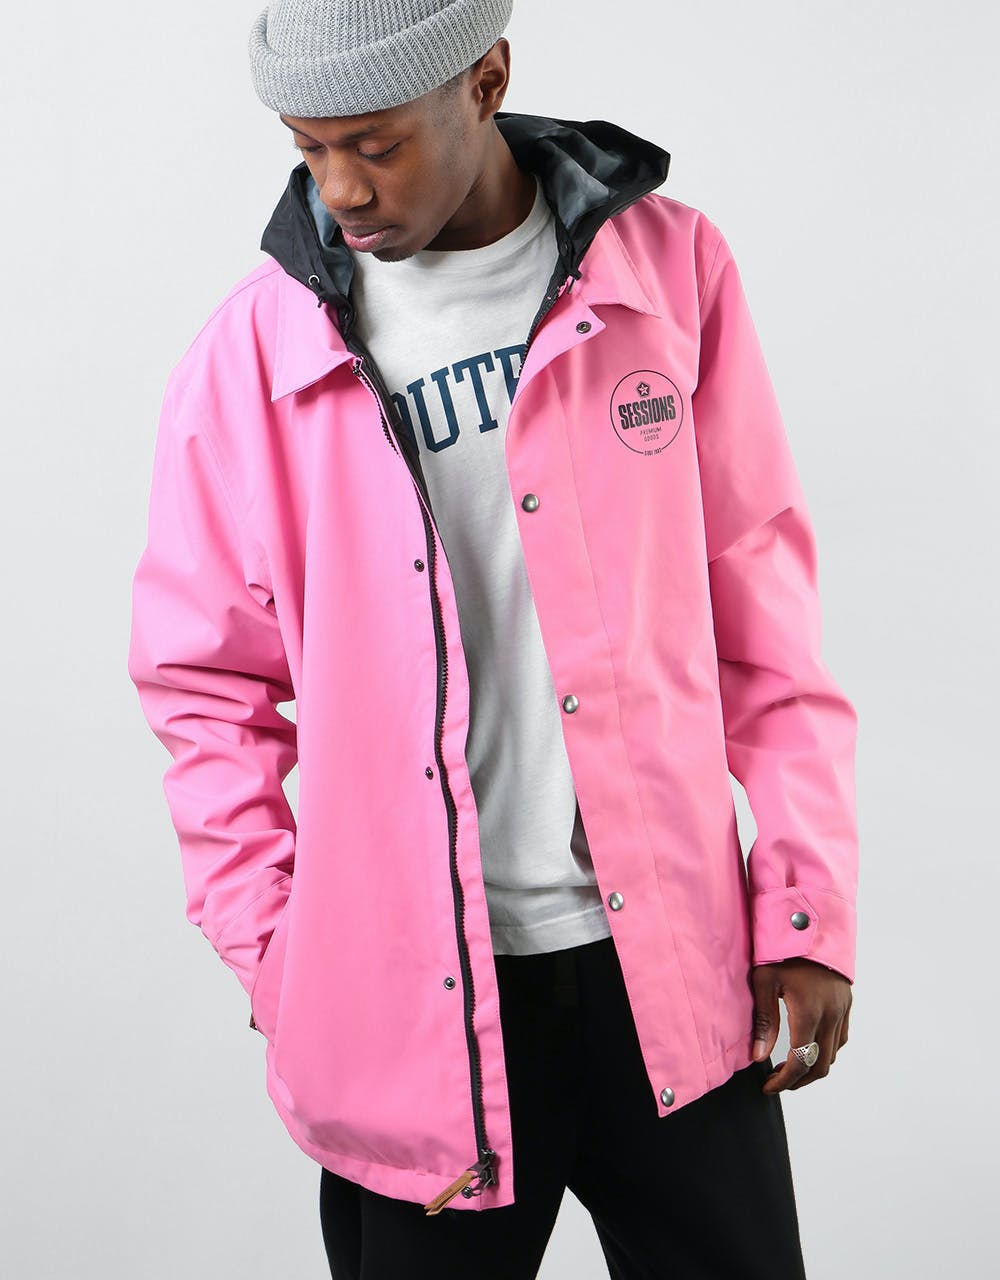 Sessions Angst Snowboard Jacket - Pink